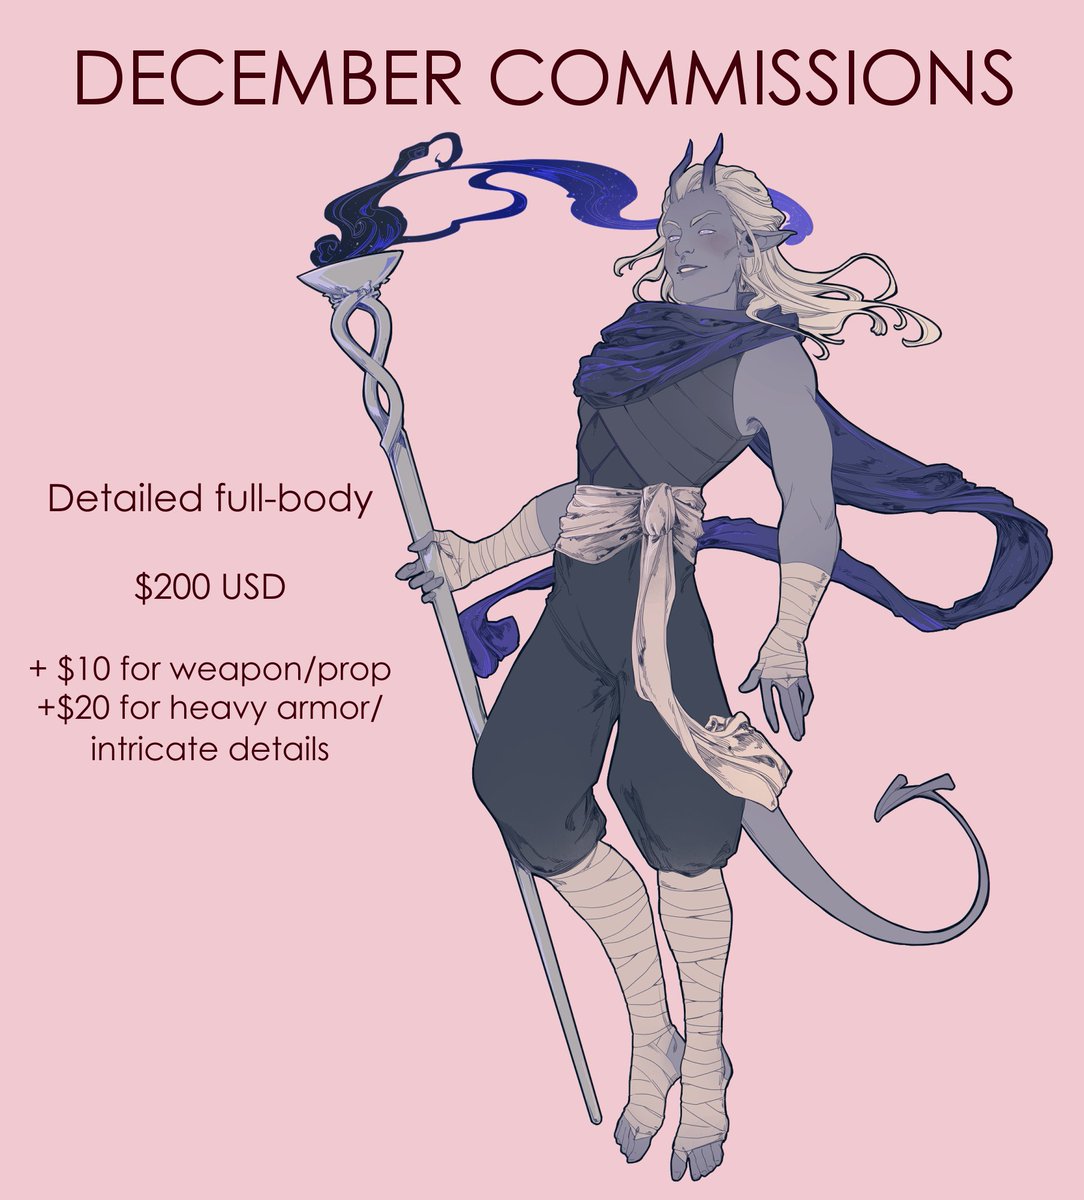 Hey all, I'm opening comms for December! 

✨ 4 - 12 slots, depending on comm type

DM me if interested!

Shares/RTs very much appreciated ??? 